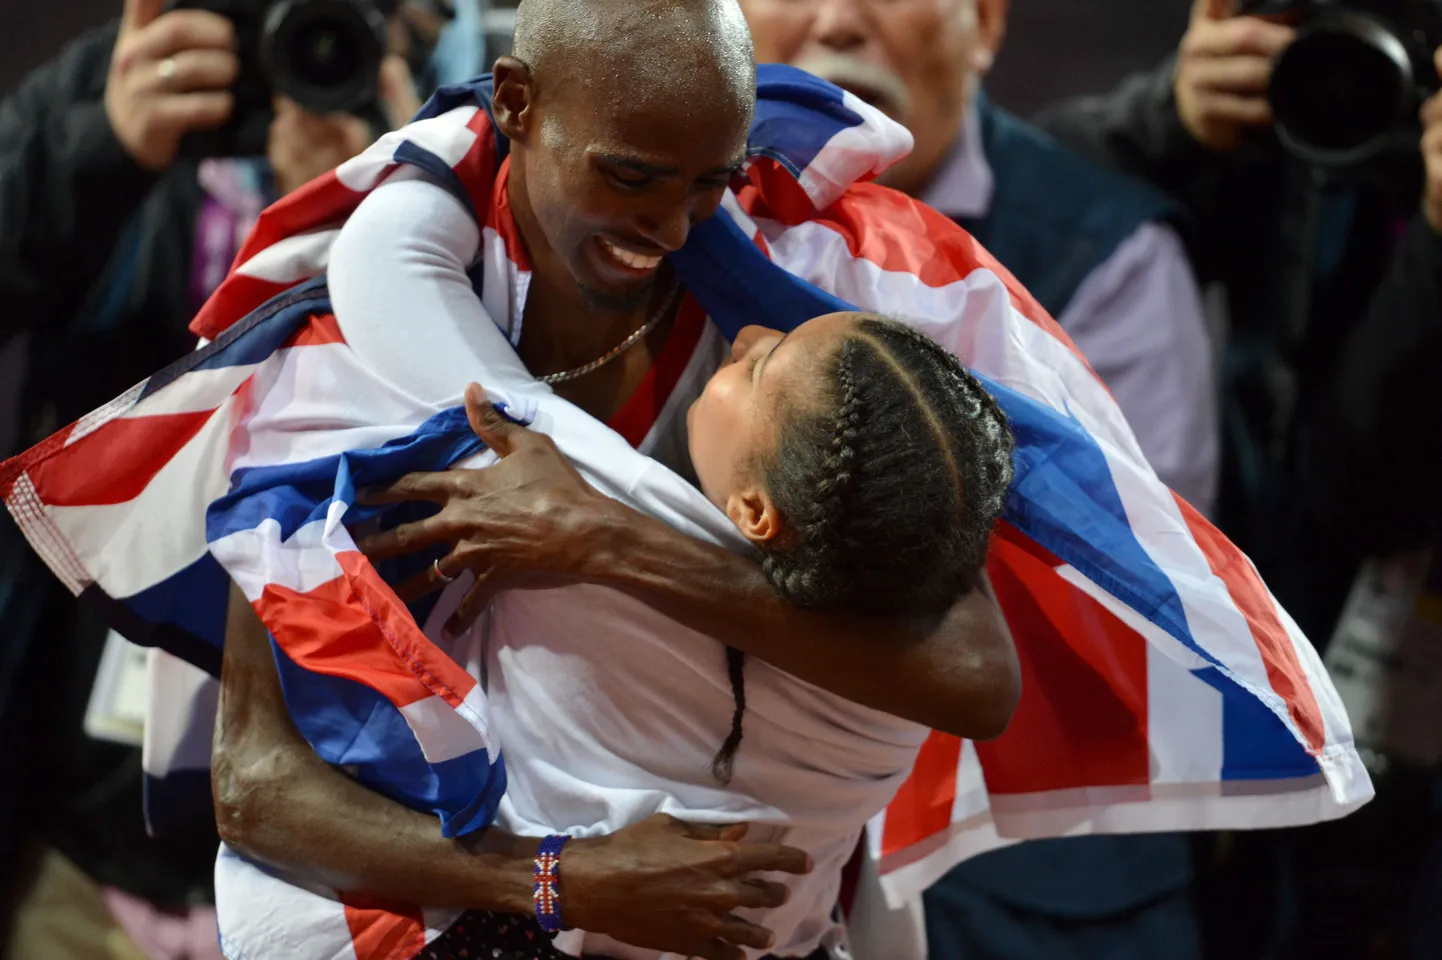 Britain's Mohamed Farah celebrates with his daughter Rihanna after winning the men's 10,000m final at the athletics event of the London 2012 Olympic Games on August 4, 2012 in London.  AFP PHOTO / ERIC FEFERBERG